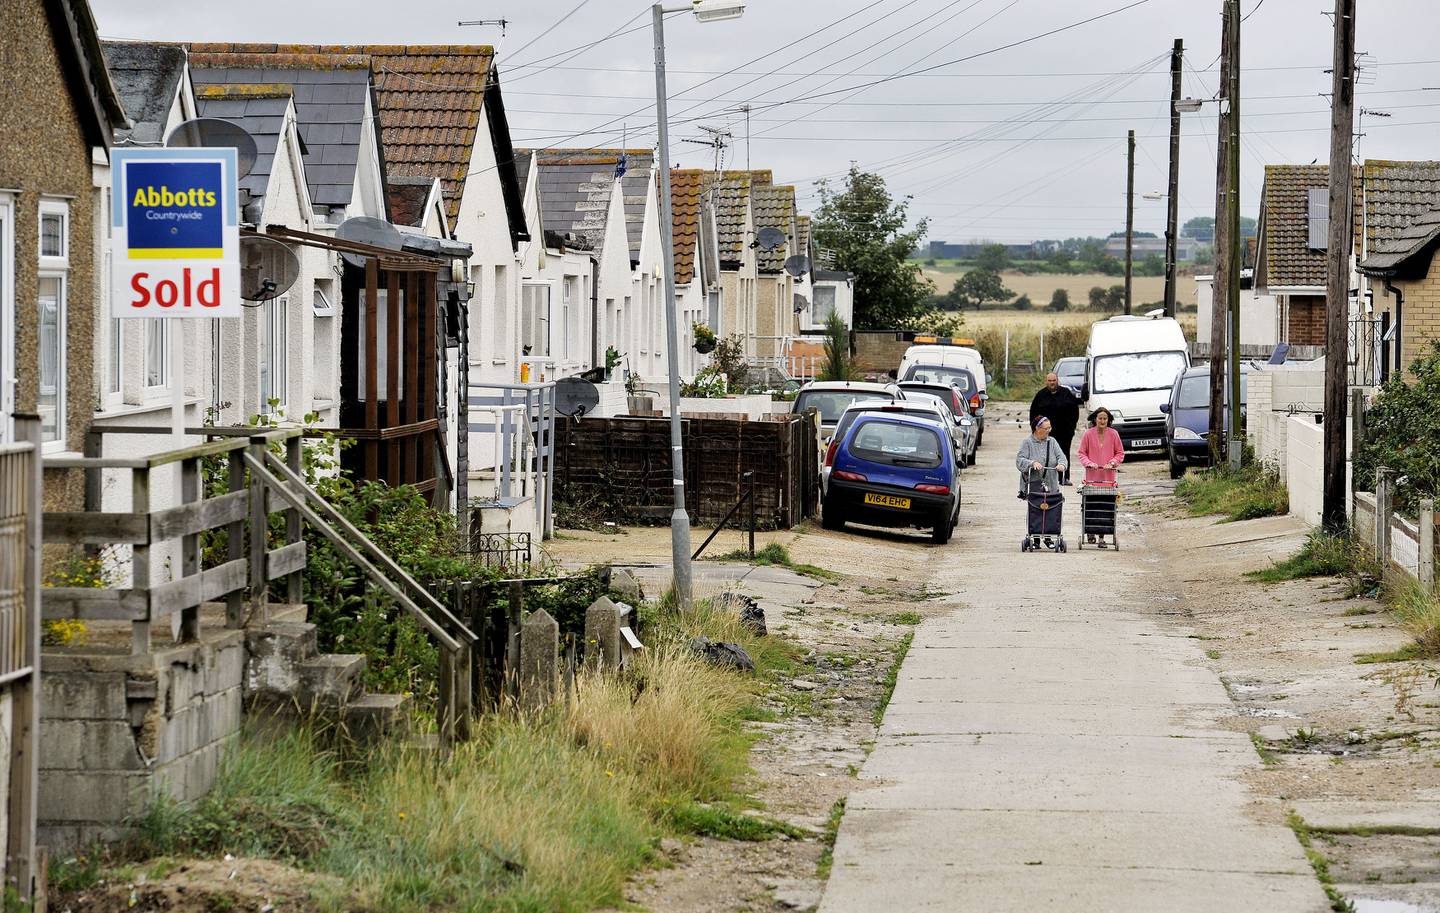 The Brooklands estate in East Jaywick, near Clacton, Essex. Parts of the UK have been neglected for decades, leading to a 'branch line' economy, according to business lobby group CBI. PA